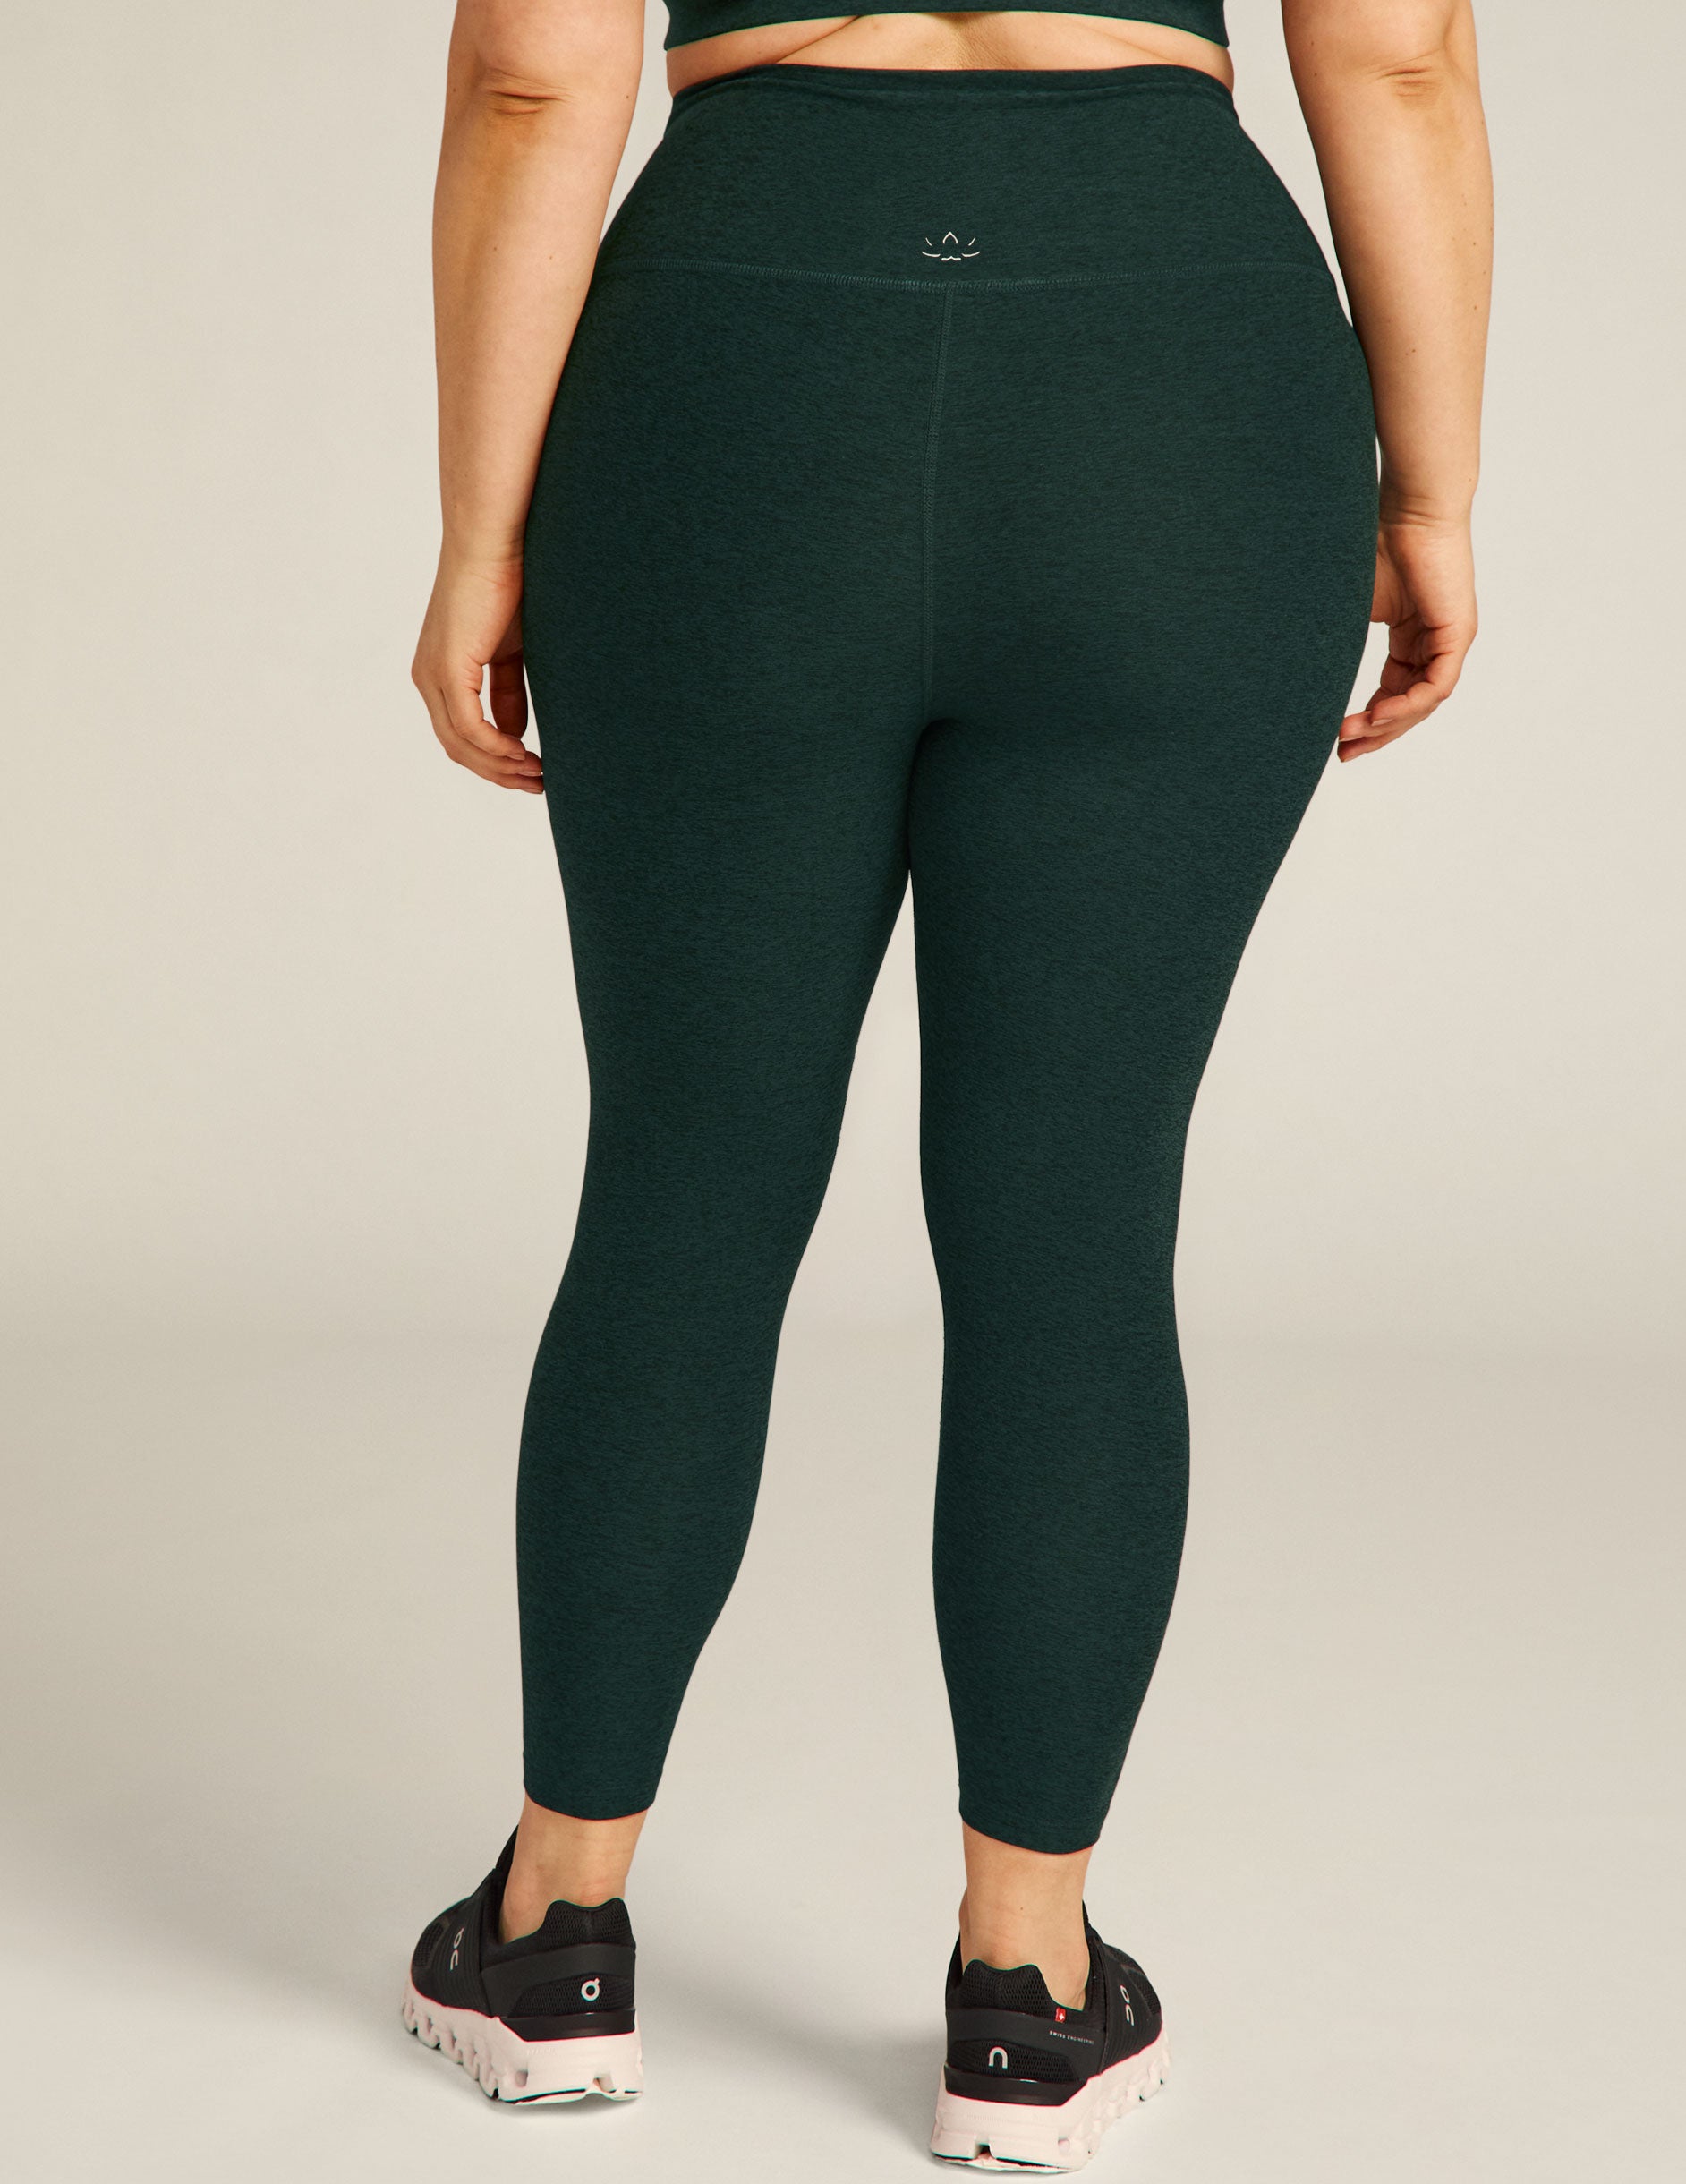 On The Run Olive Green Ribbed Leggings